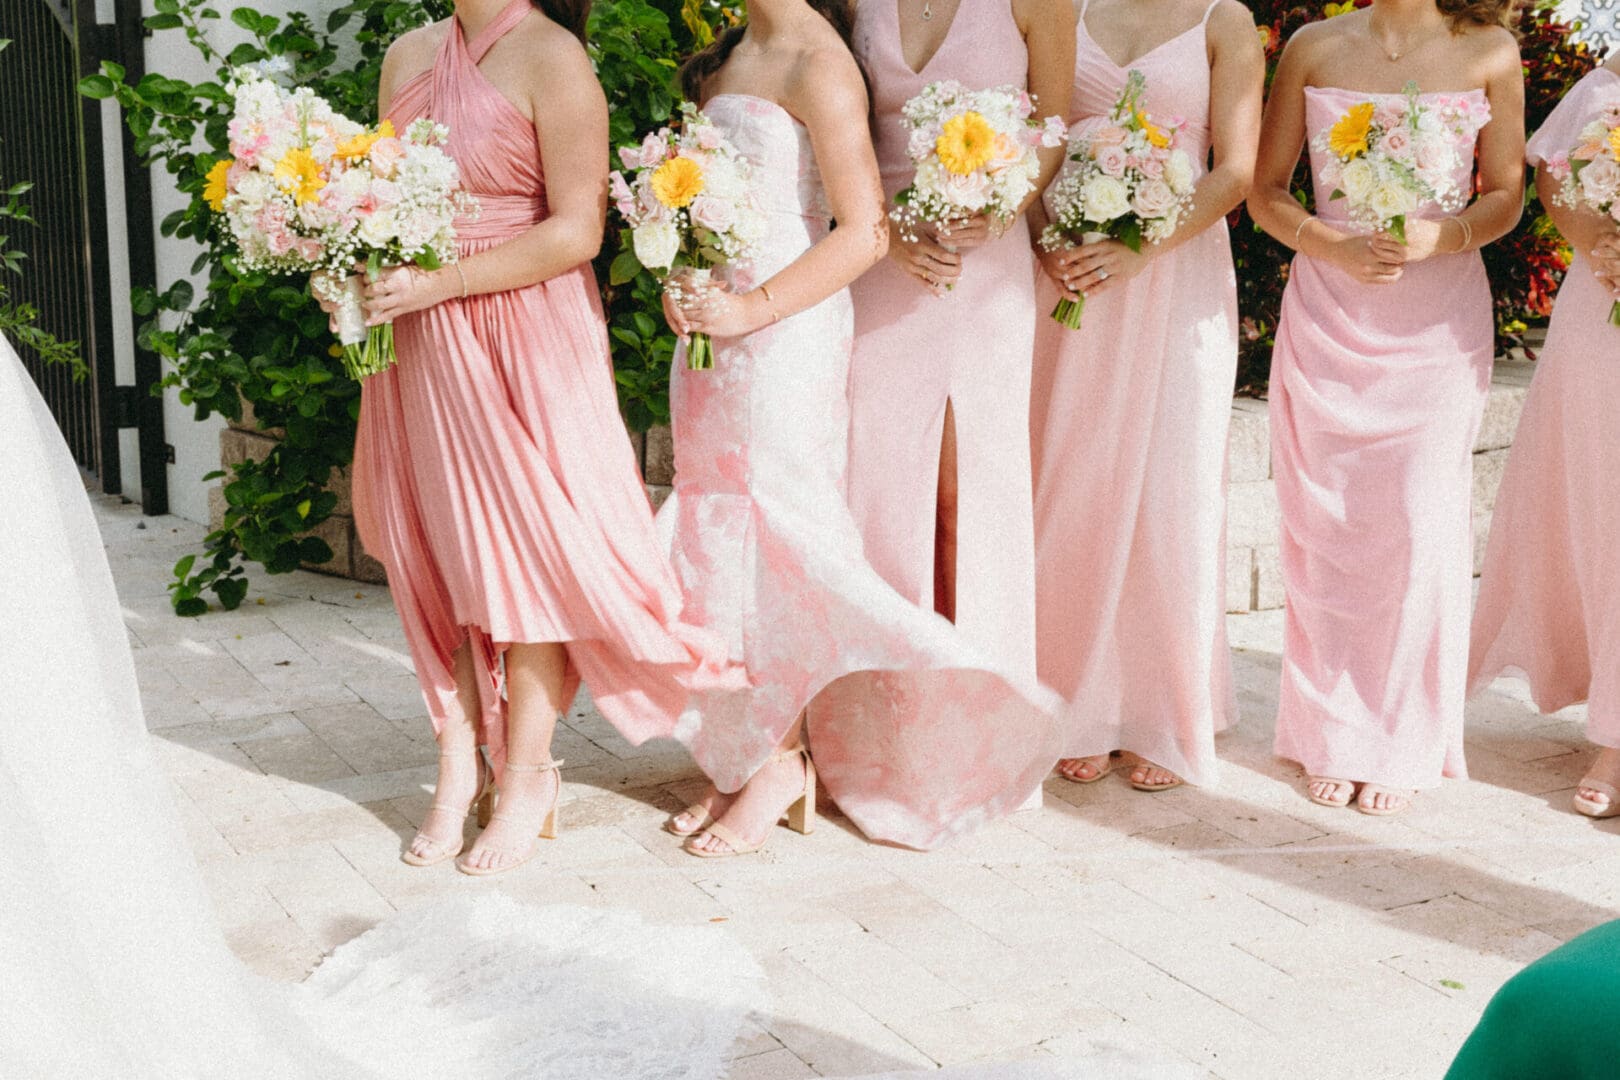 A group of women in pink dresses holding flowers.